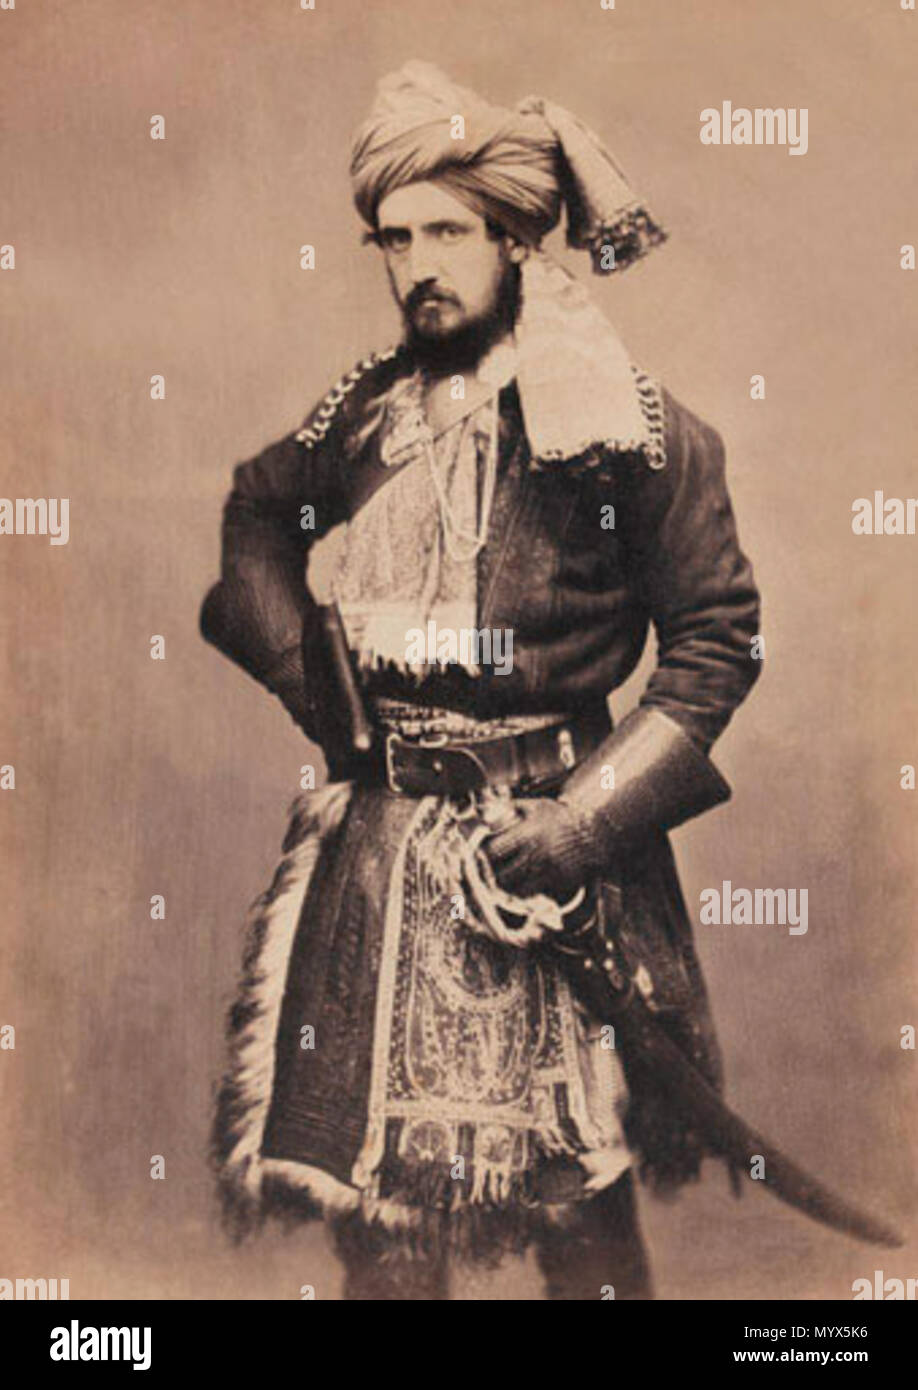 . English: Original description: Dighton Probyn, 2nd Punjab Cavalry, in Indian dress, 1857 (c). Photograph, India, 1857 (c). Dighton MacNaghten Probyn (1833-1924) began his career with 2nd Punjab Cavalry, serving for five years in operations on the Trans-Indus frontier before his outstanding service in the Indian Mutiny (1857-1859). He was mentioned in despatches seven times during the Mutiny, then awarded the Victoria Cross 'for gallantry and daring throughout this campaign'. In 1858, he was appointed to command 1st Regiment of Sikh Irregular Cavalry. This became 11th Bengal Cavalry in 1861.  Stock Photo